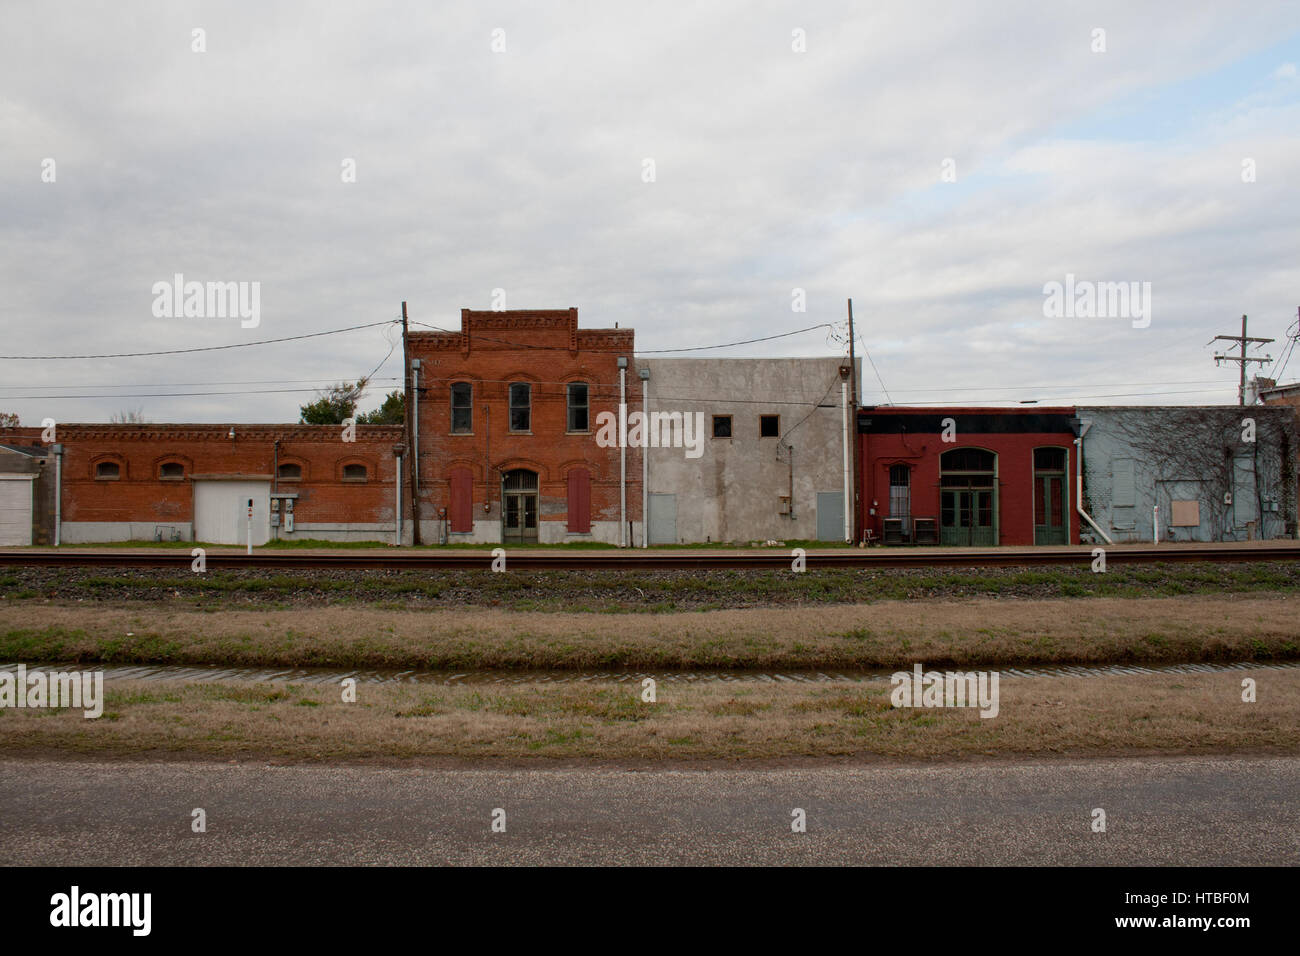 Weathered facades of historic buildings along a railroad track in a rural town in Texas. Stock Photo